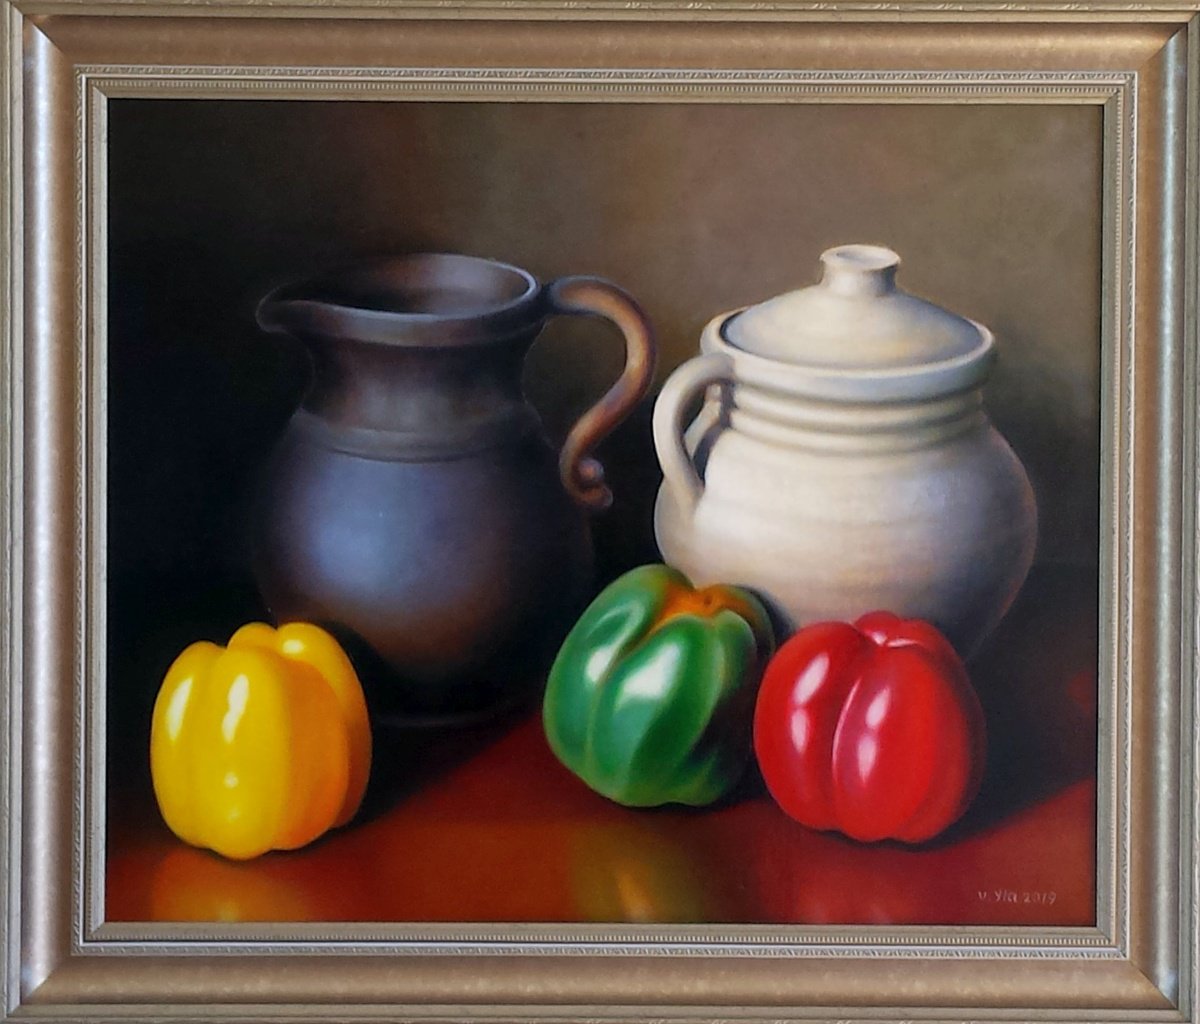 Peppers and pottery by Valentinas Yla